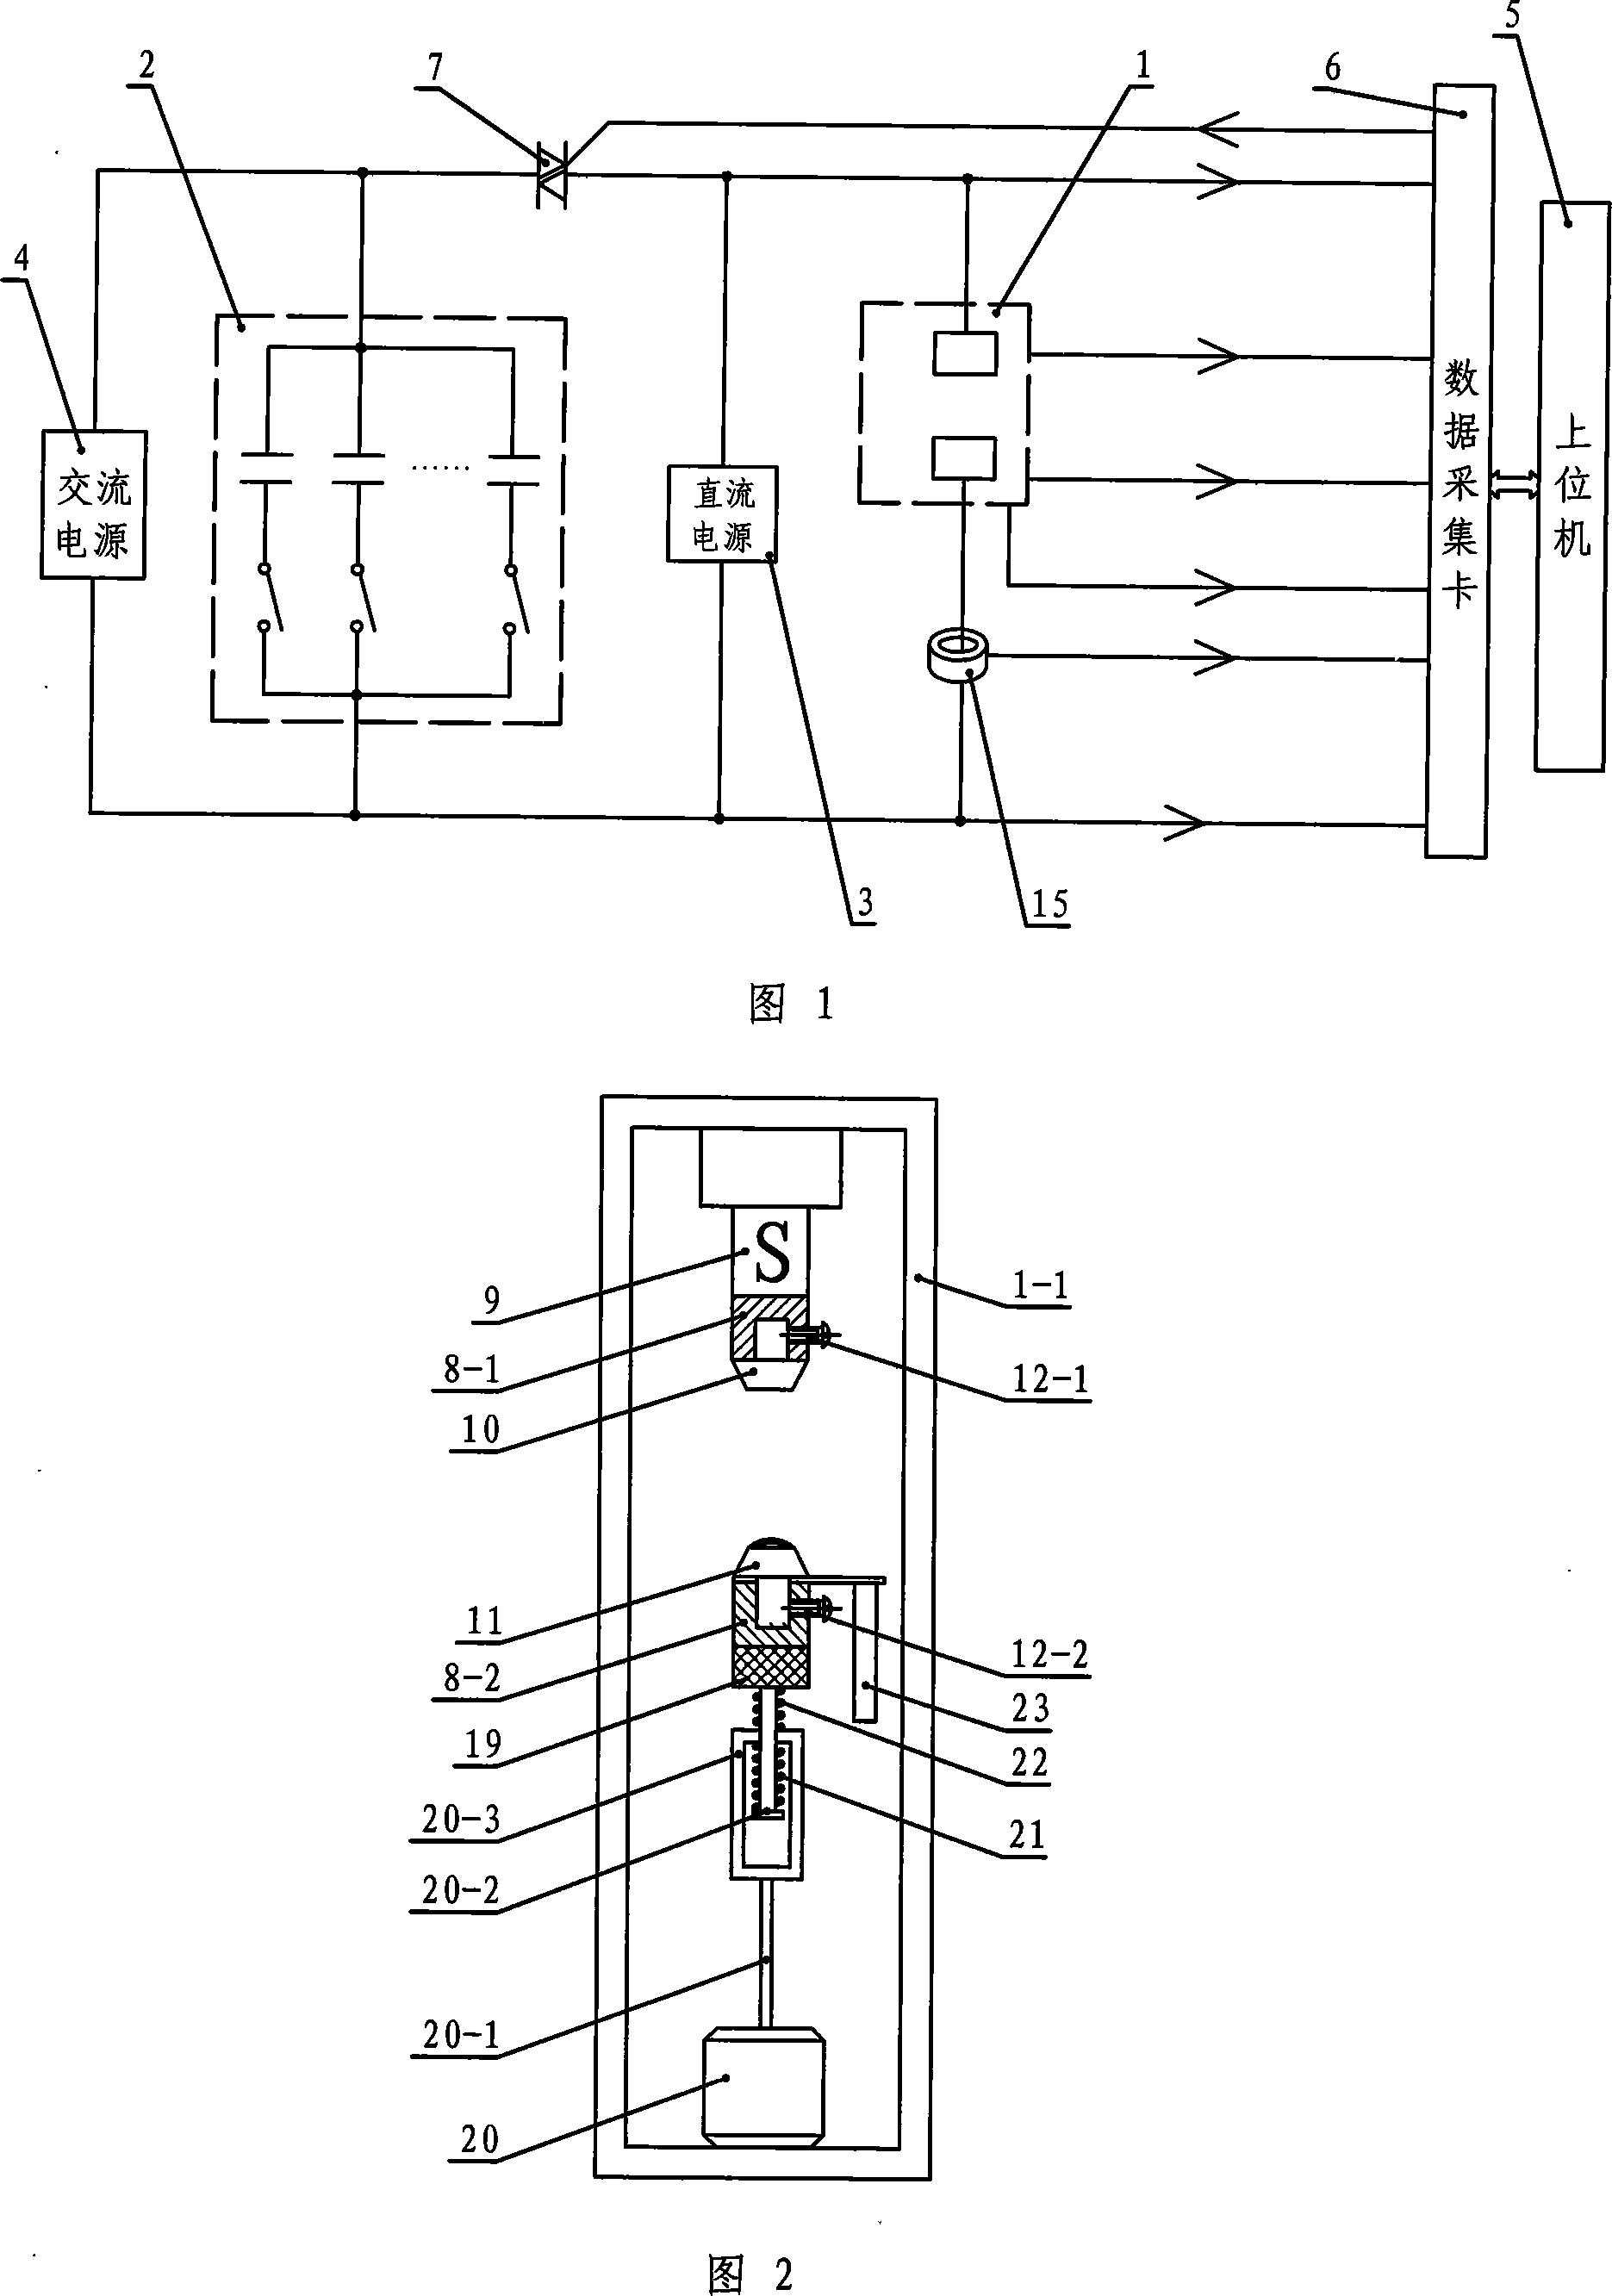 Device for testing electrical erosion property of electrical contact material